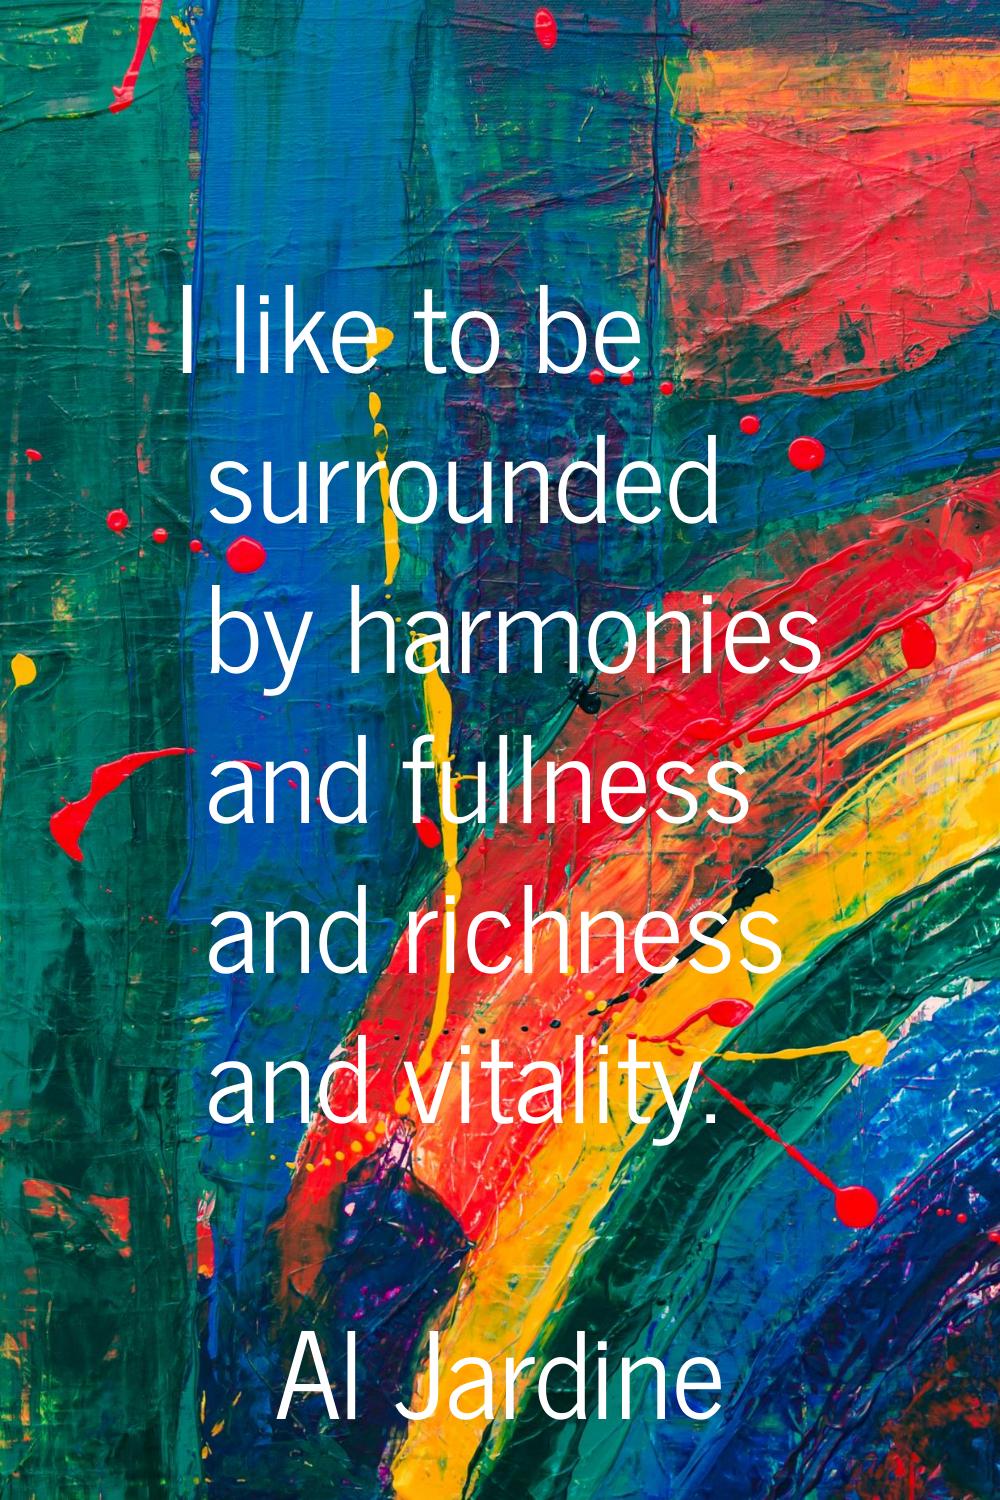 I like to be surrounded by harmonies and fullness and richness and vitality.